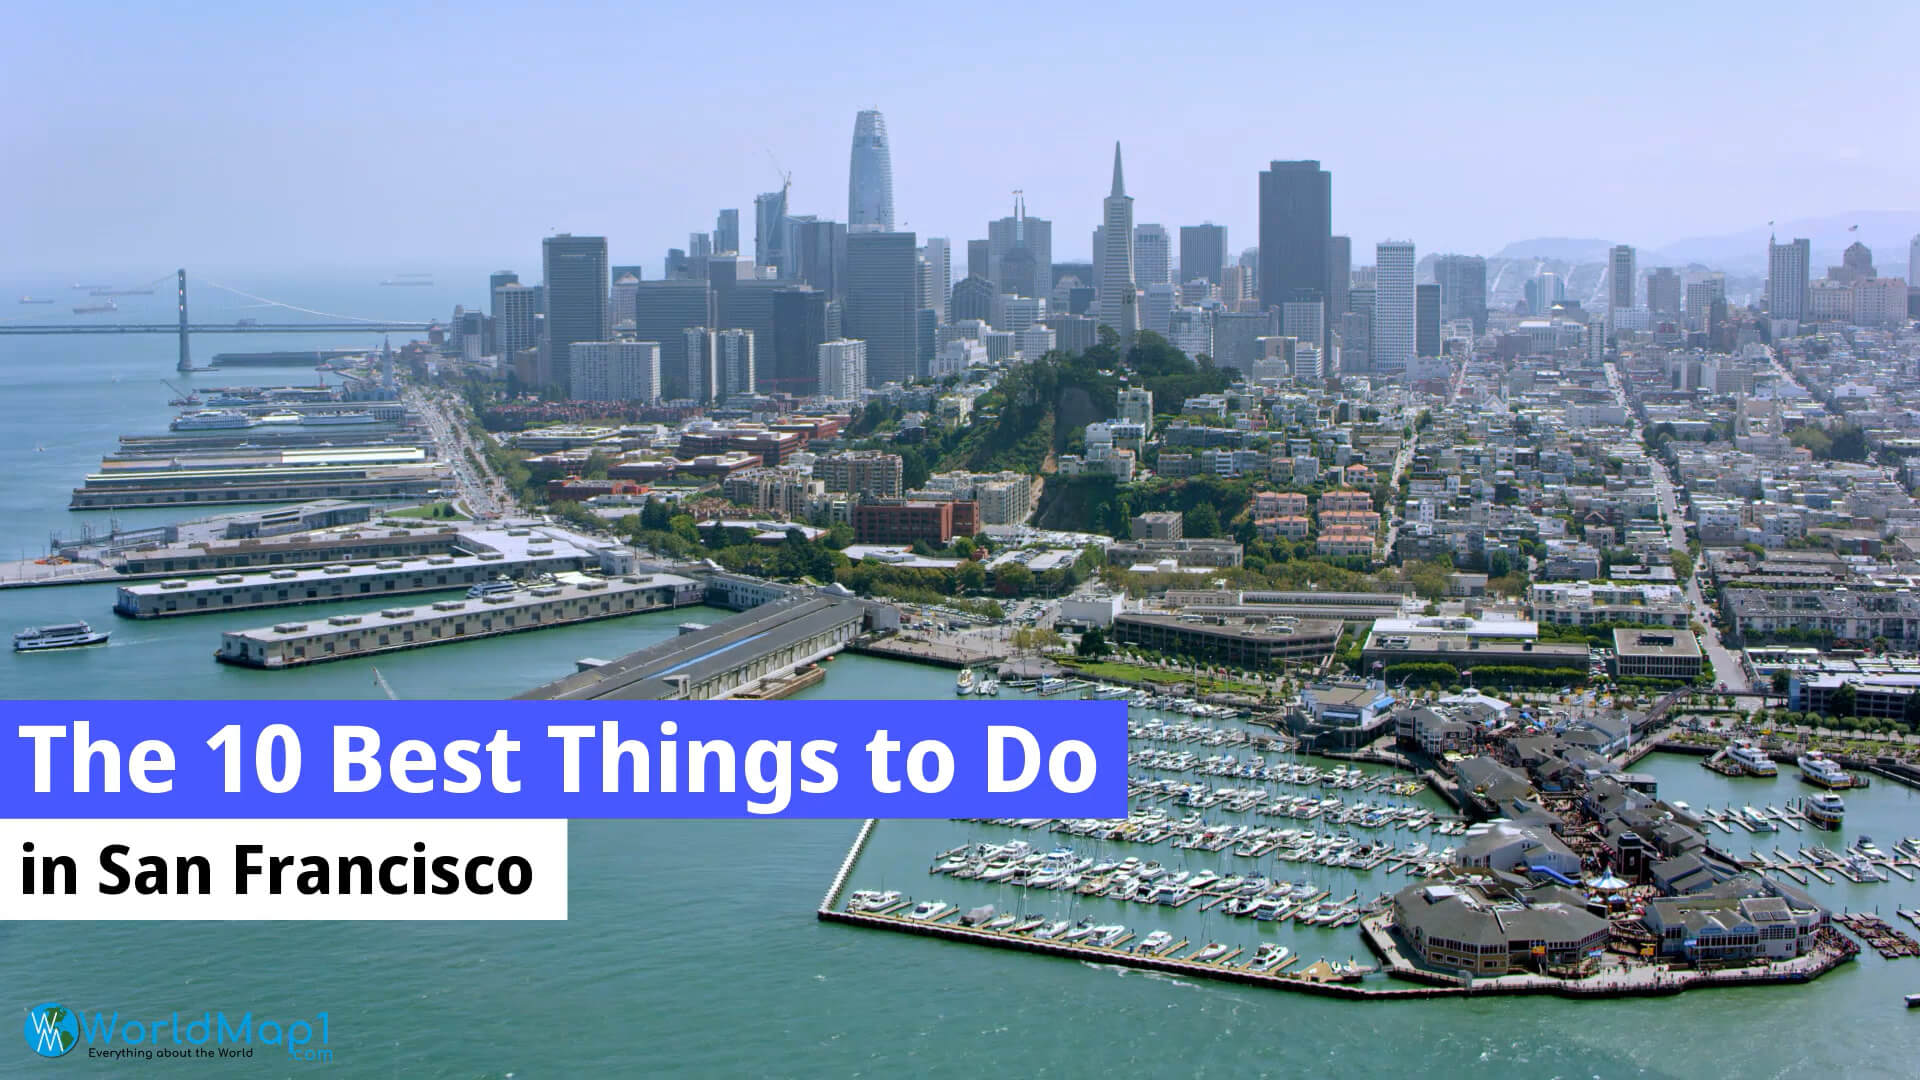 The 10 Best Things to Do in San Francisco